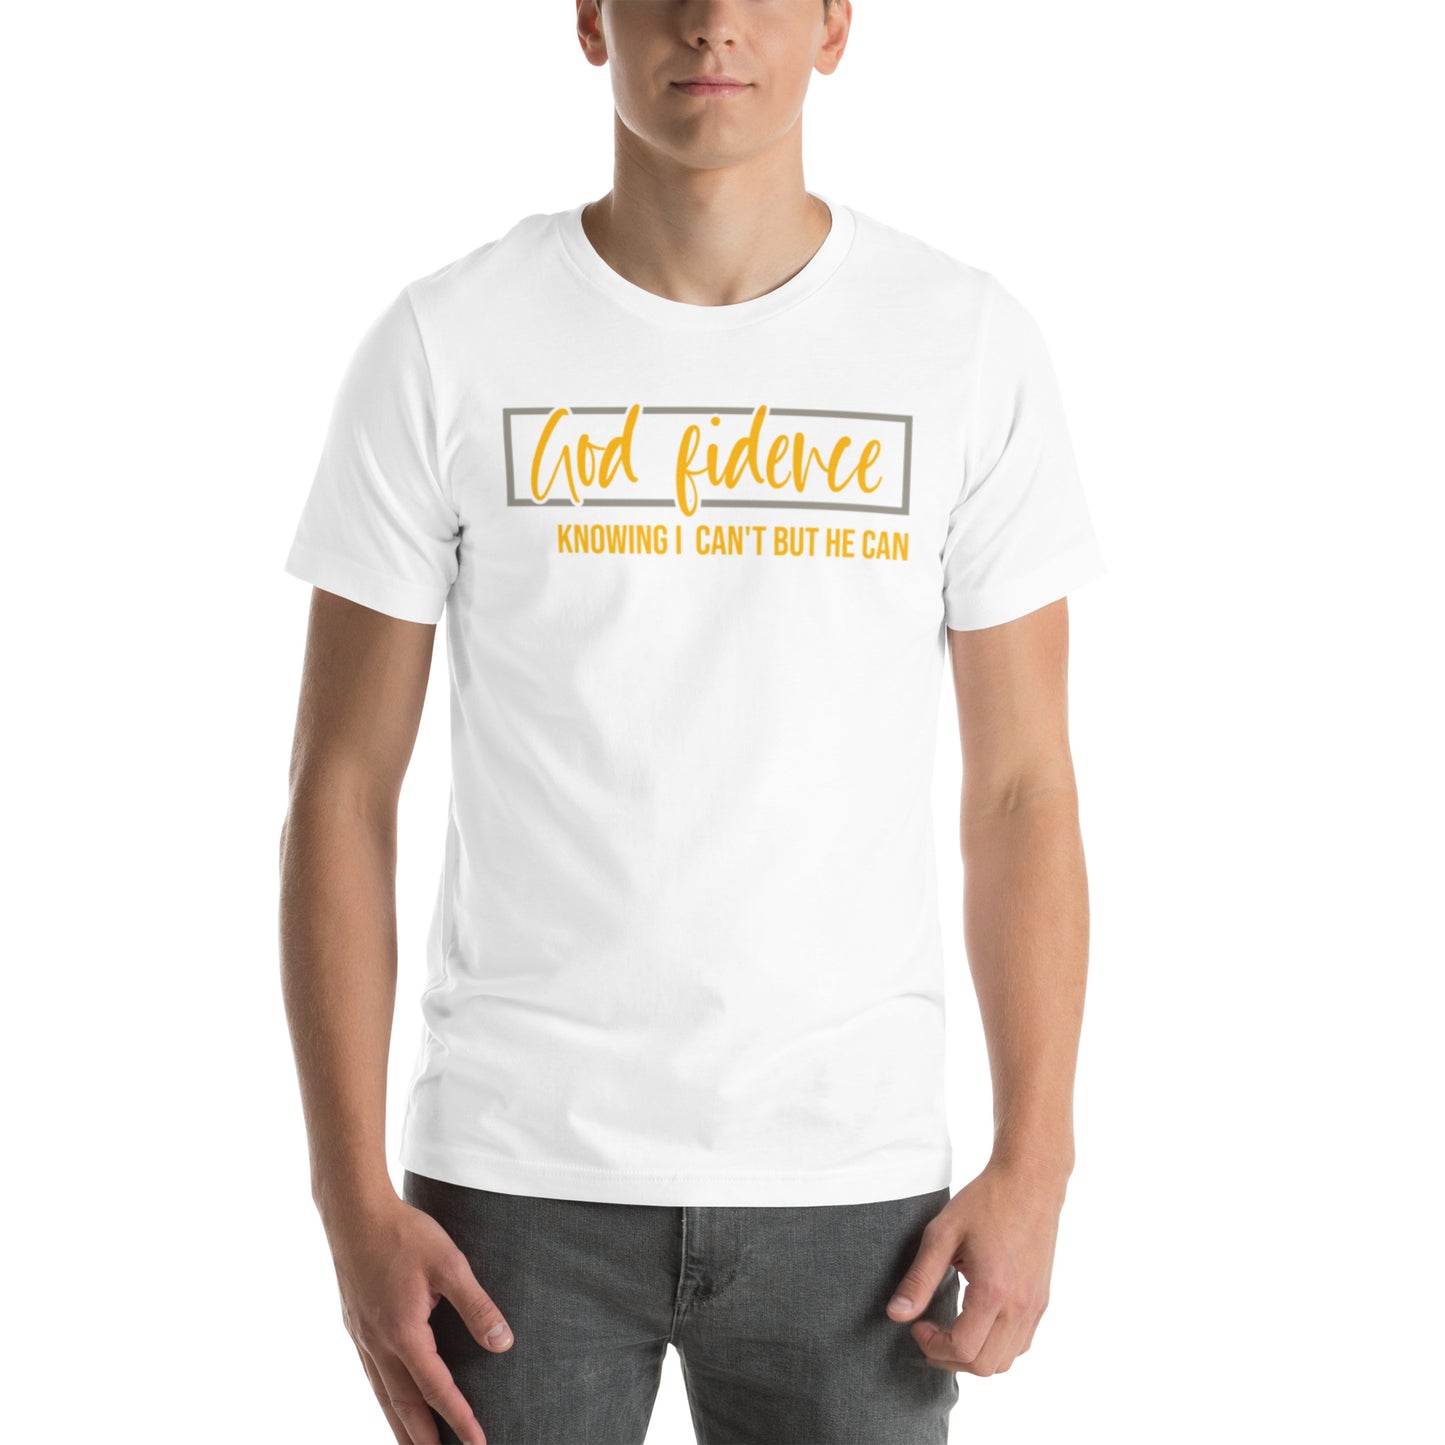 God fidence Knowing I Can't But He Can Unisex t-shirt